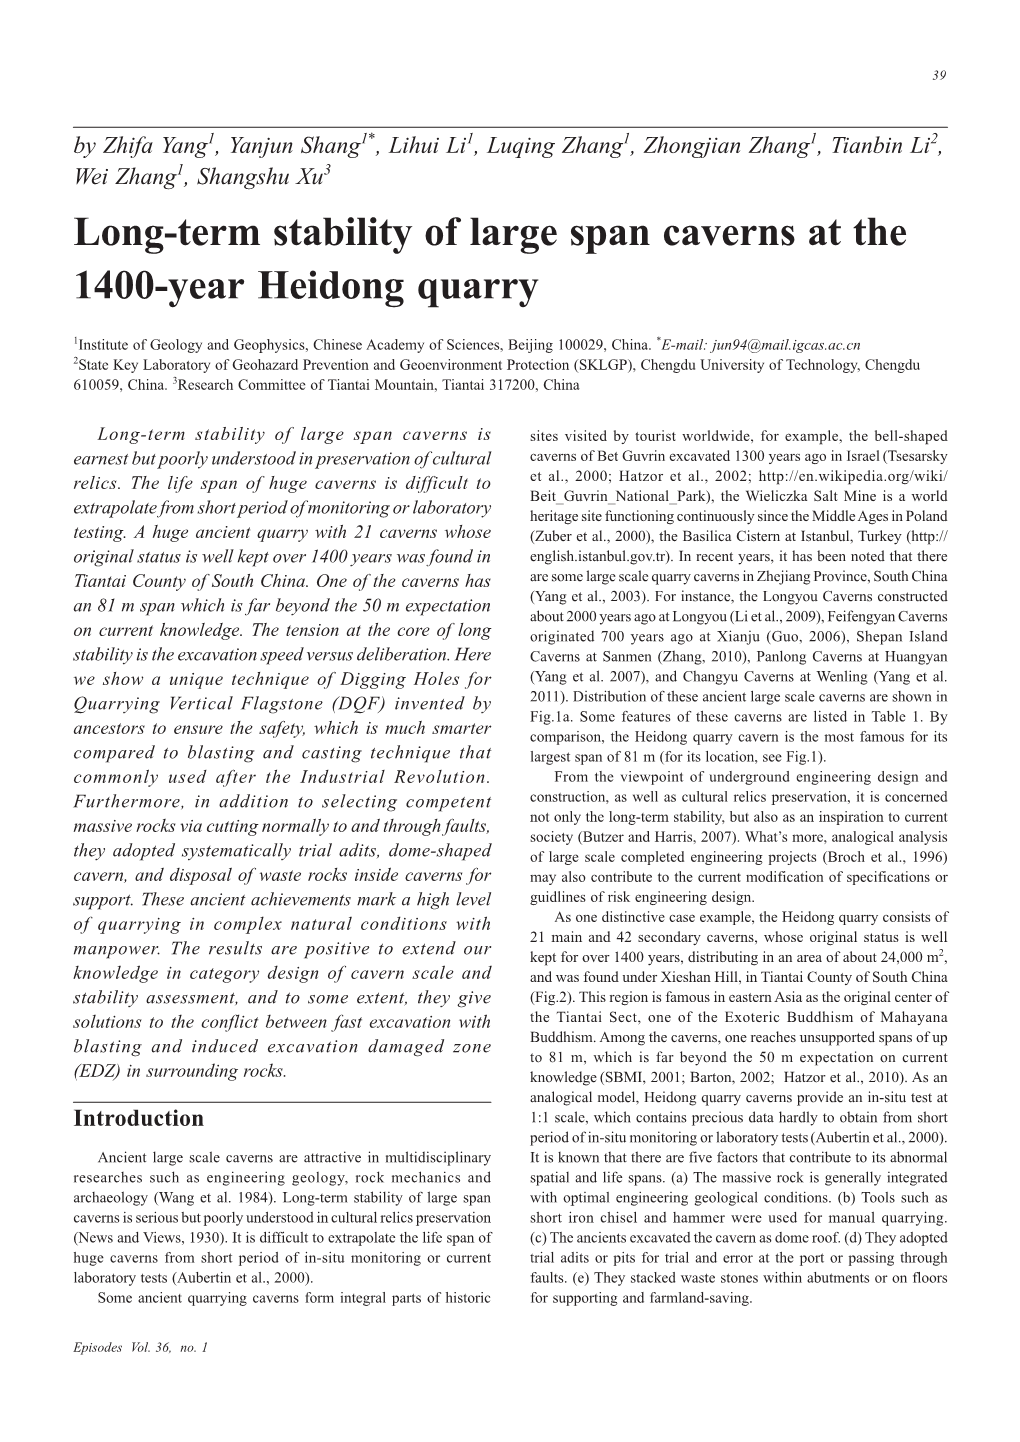 Long-Term Stability of Large Span Caverns at the 1400-Year Heidong Quarry